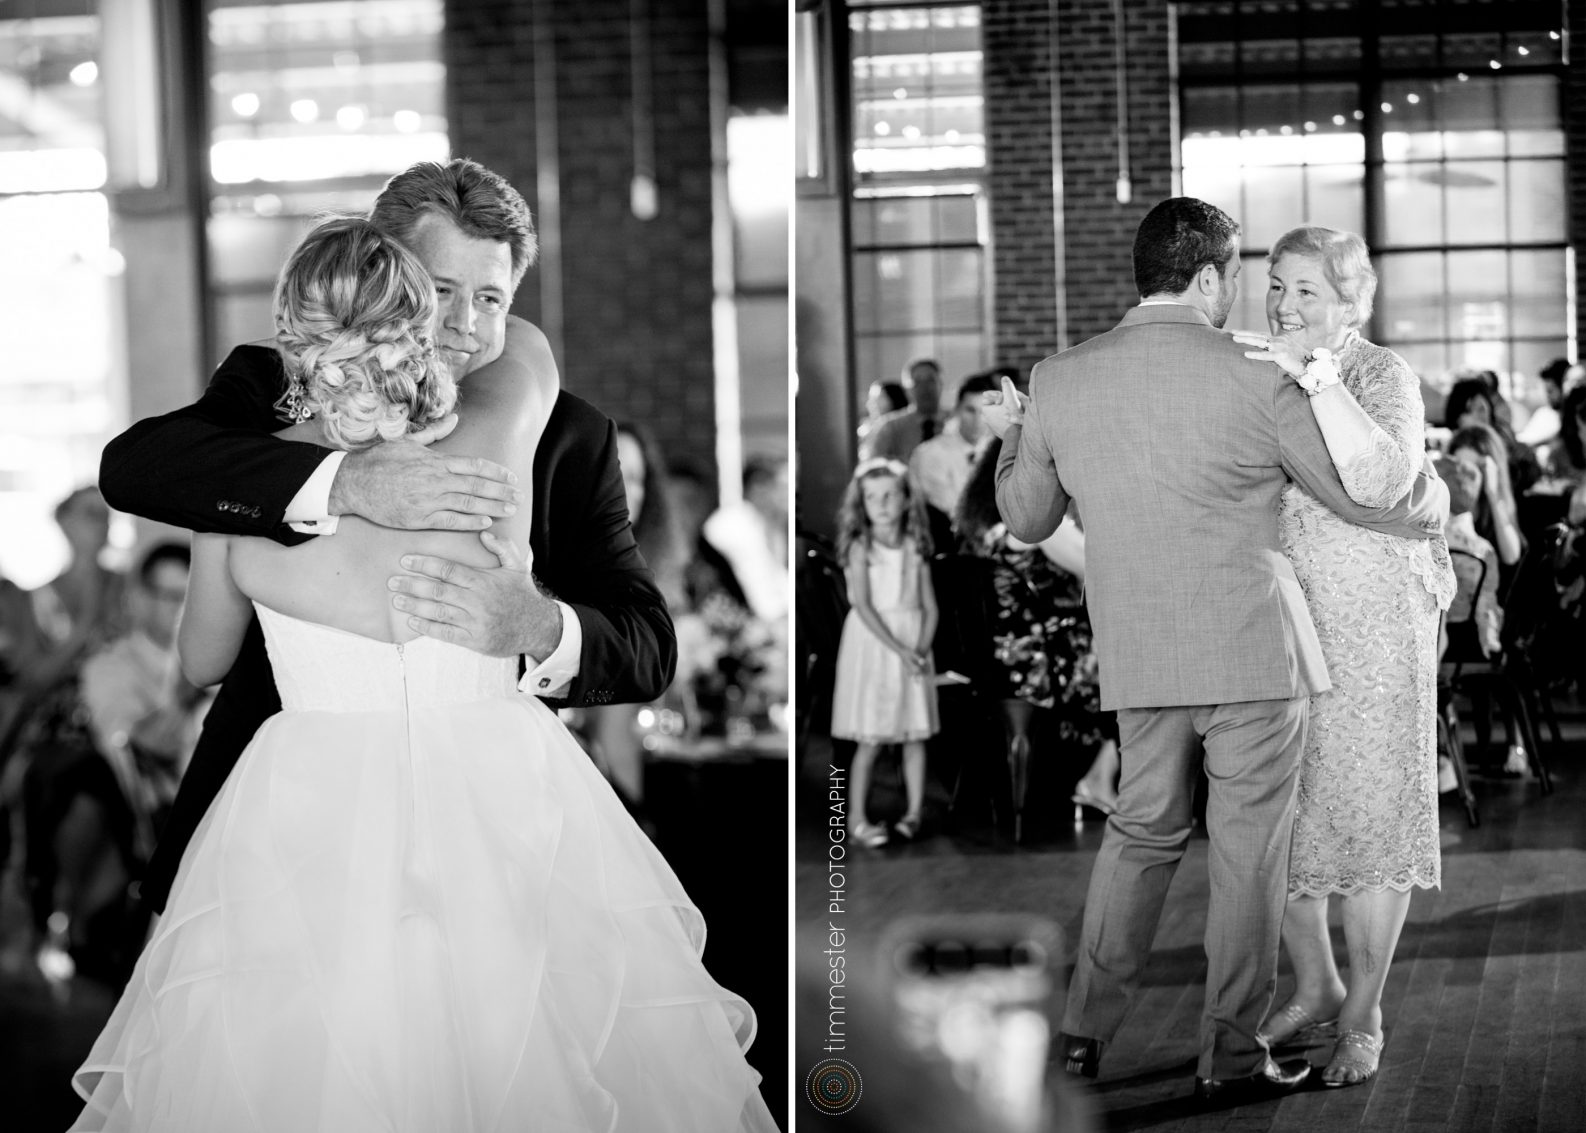 Father daughter and mother son dances at The Rickhouse wedding reception in North Carolina.